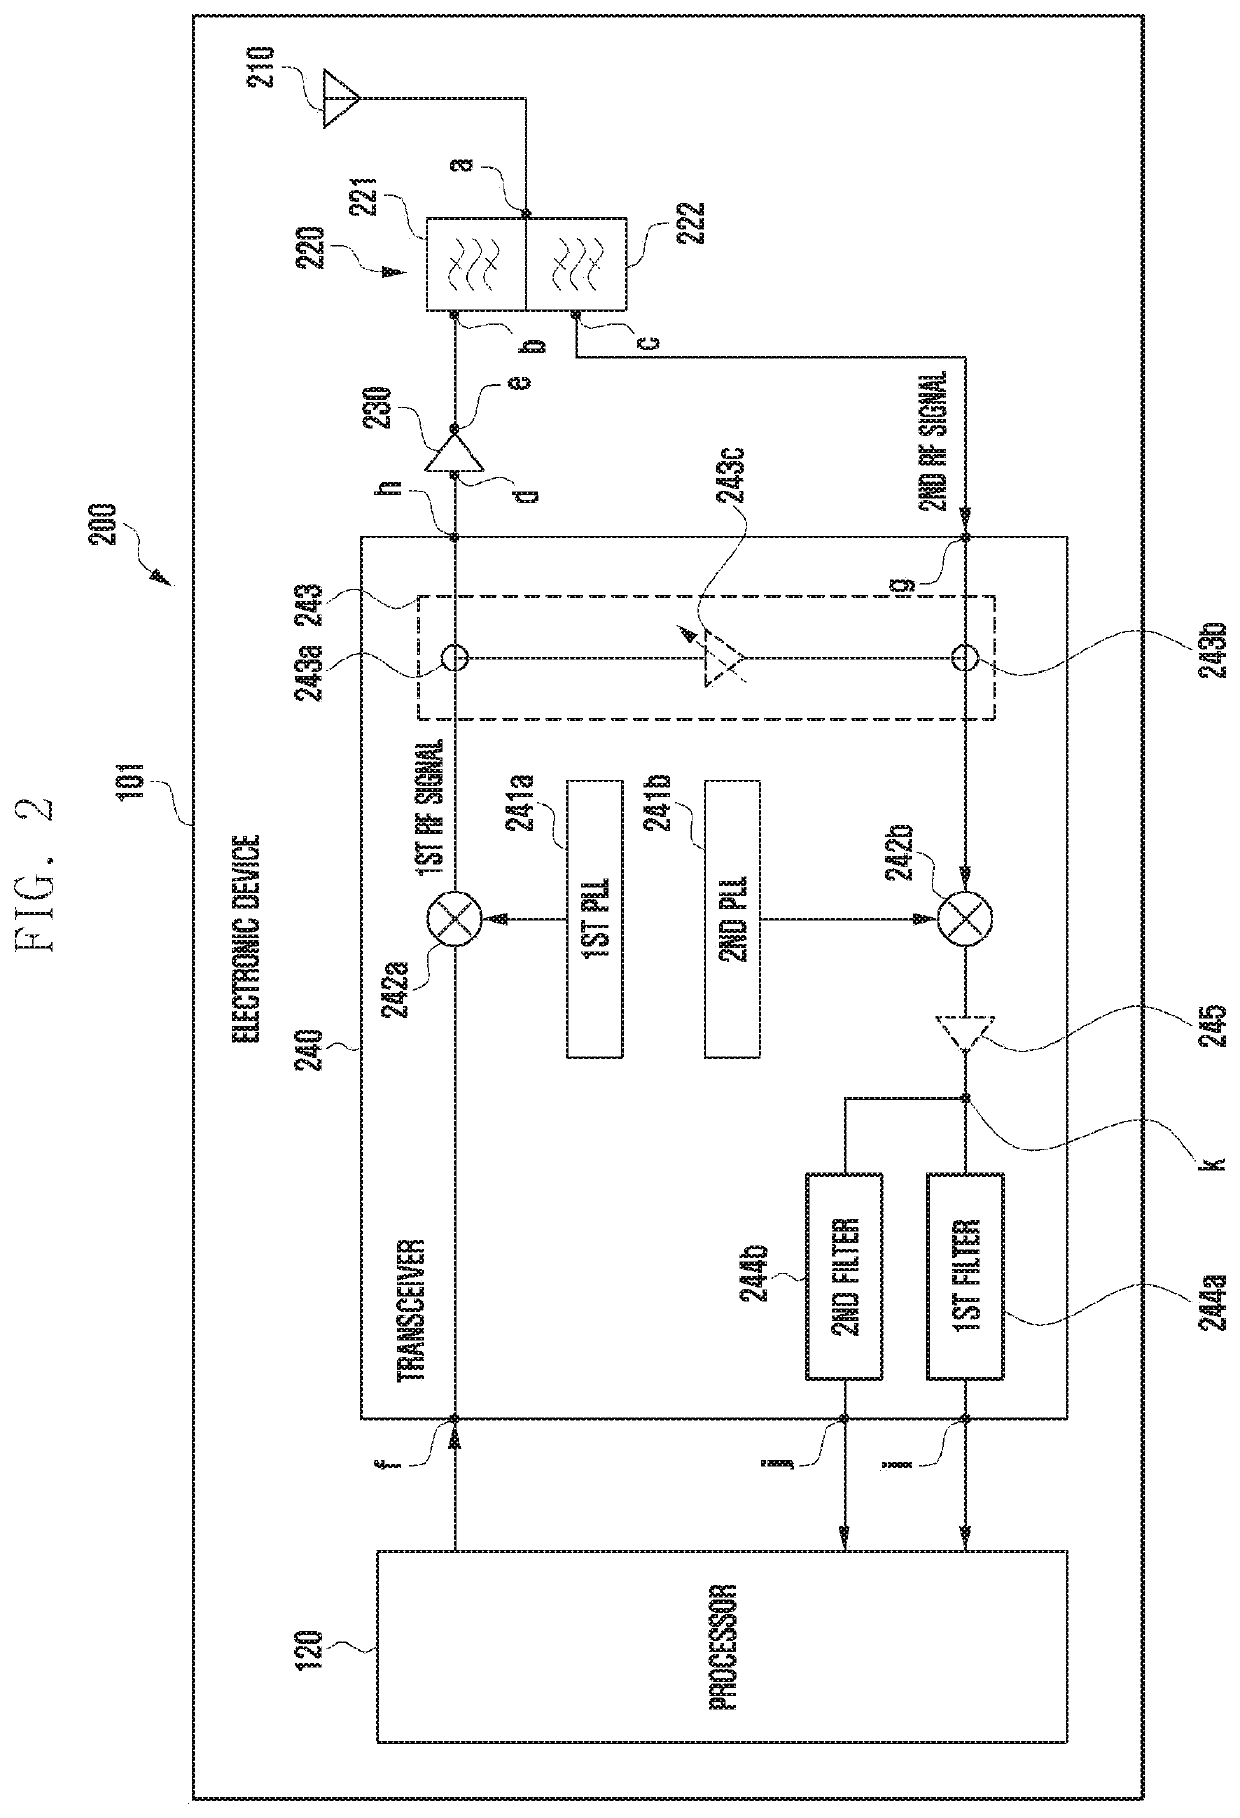 Electronic device including phase locked loop circuit used for radio frequency communication